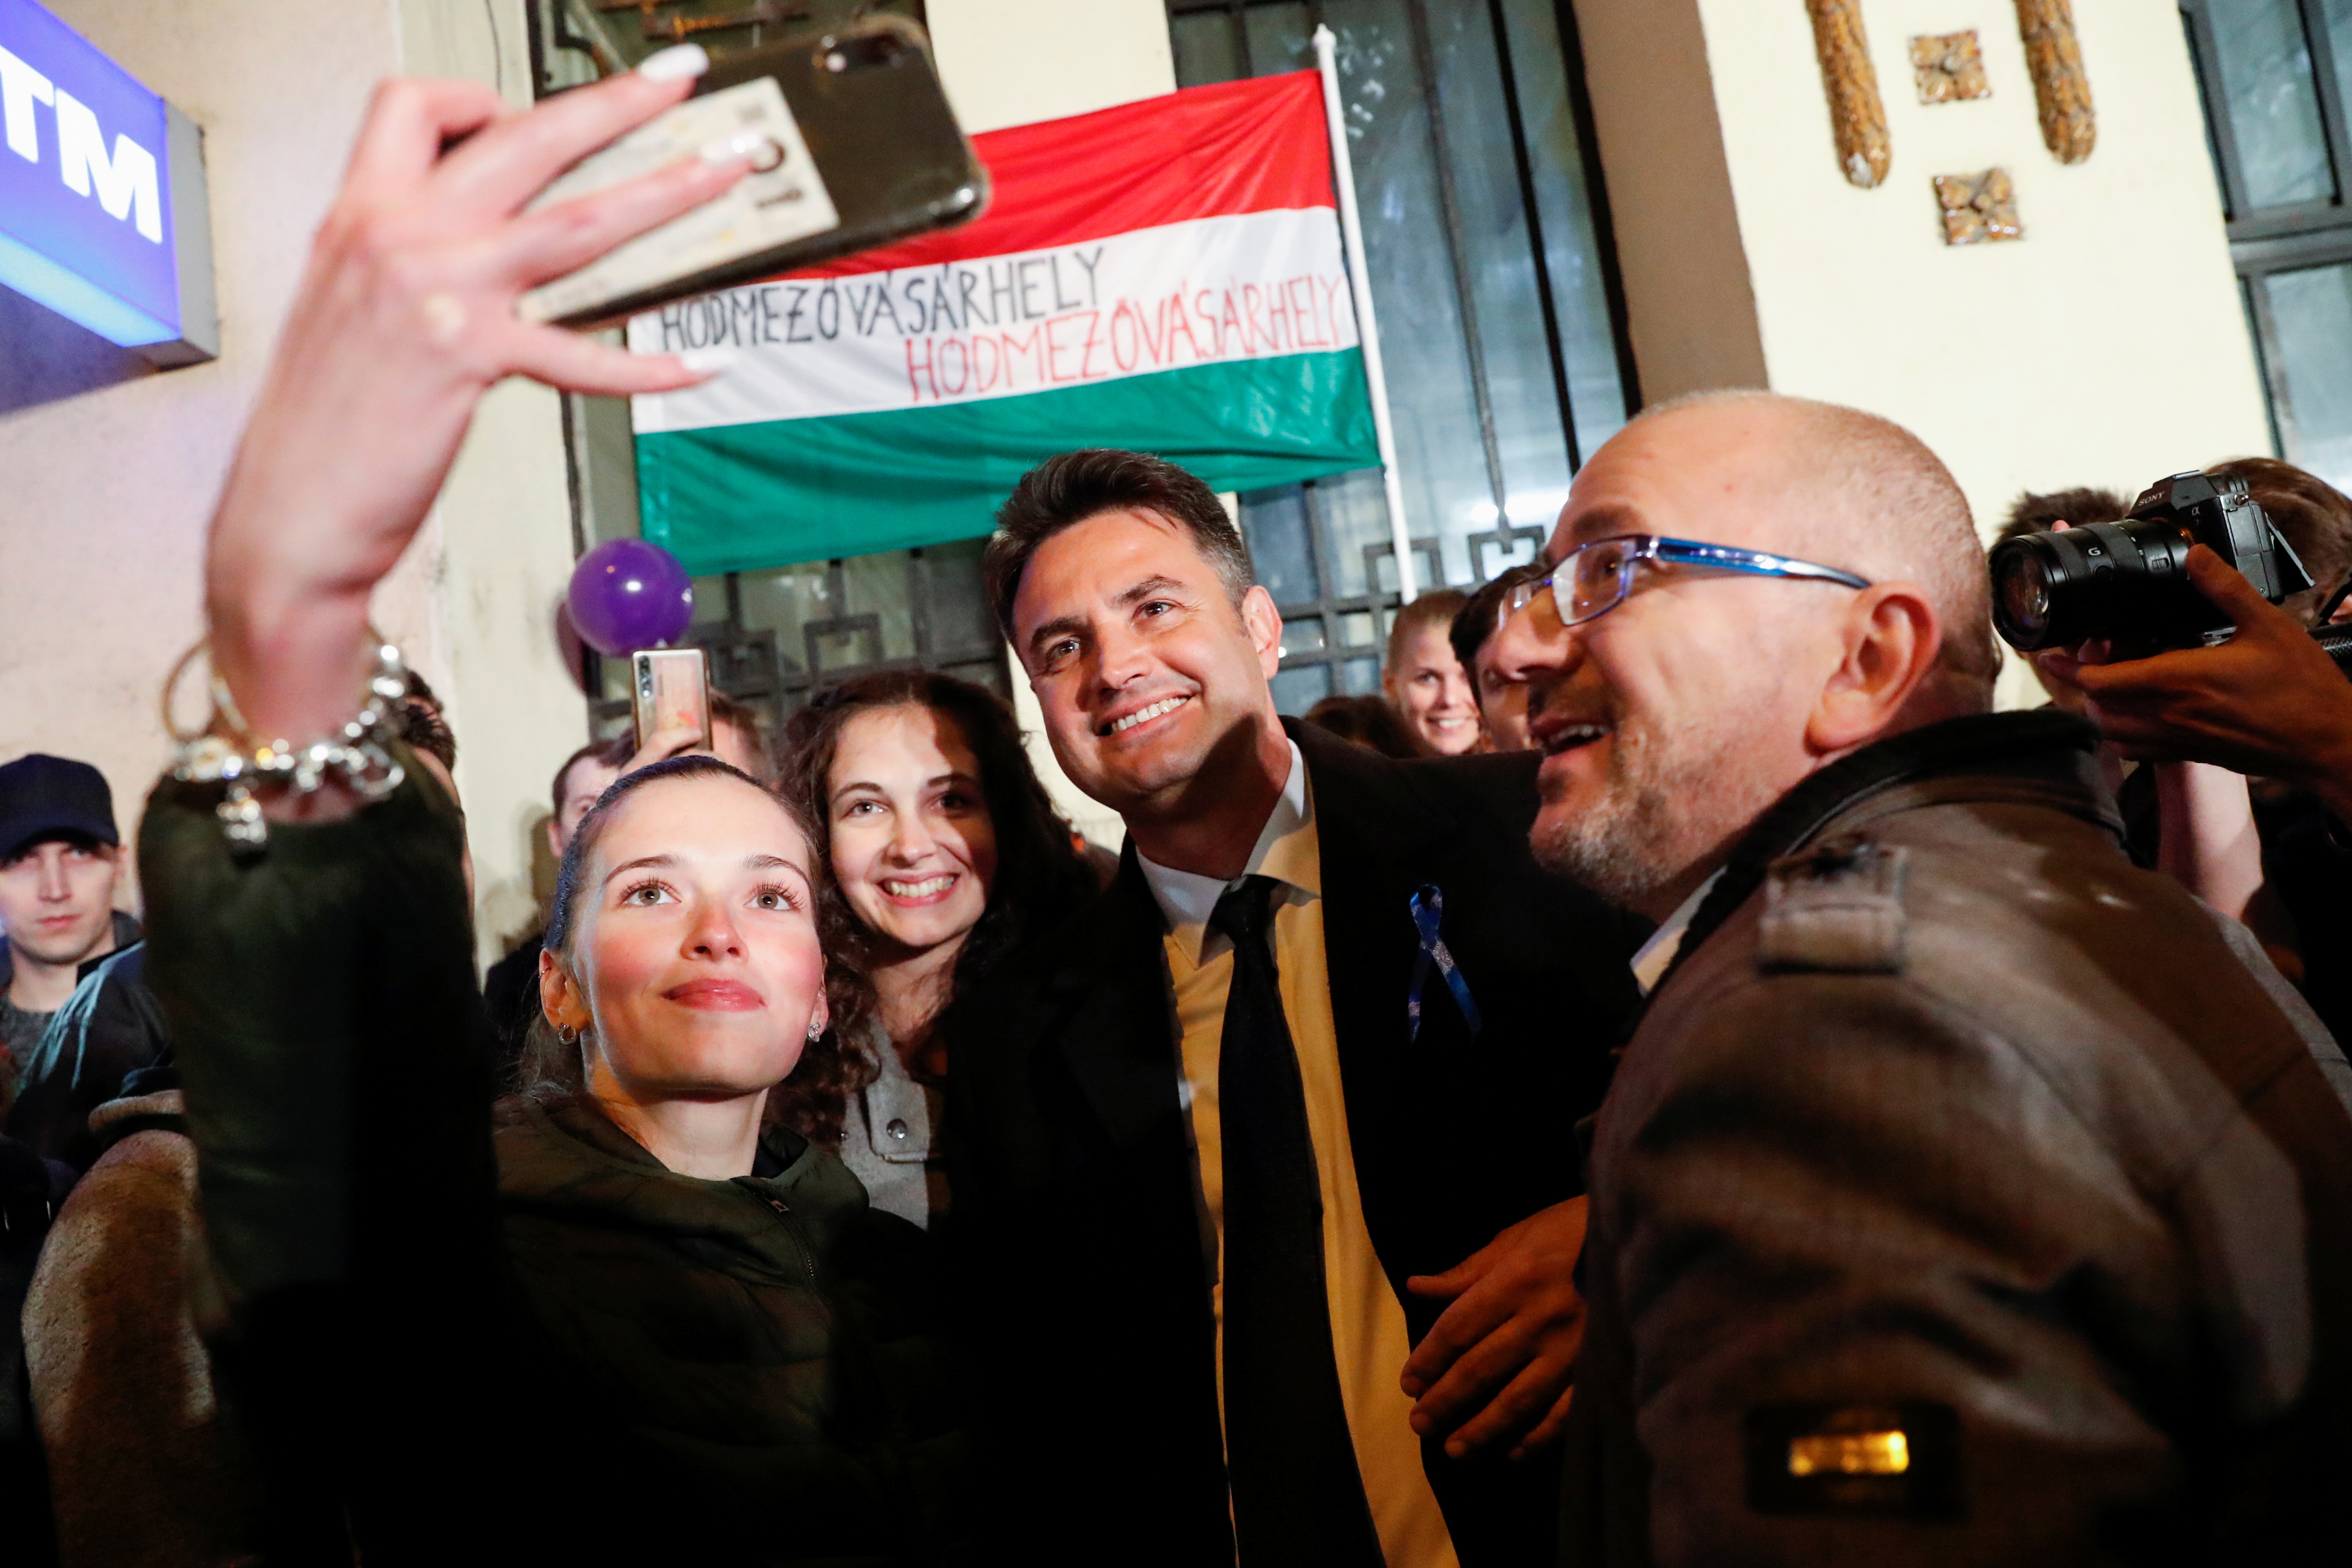 Opposition candidate for prime minister Peter Marki-Zay poses for a selfie with supporters at the election headquarters in Budapest